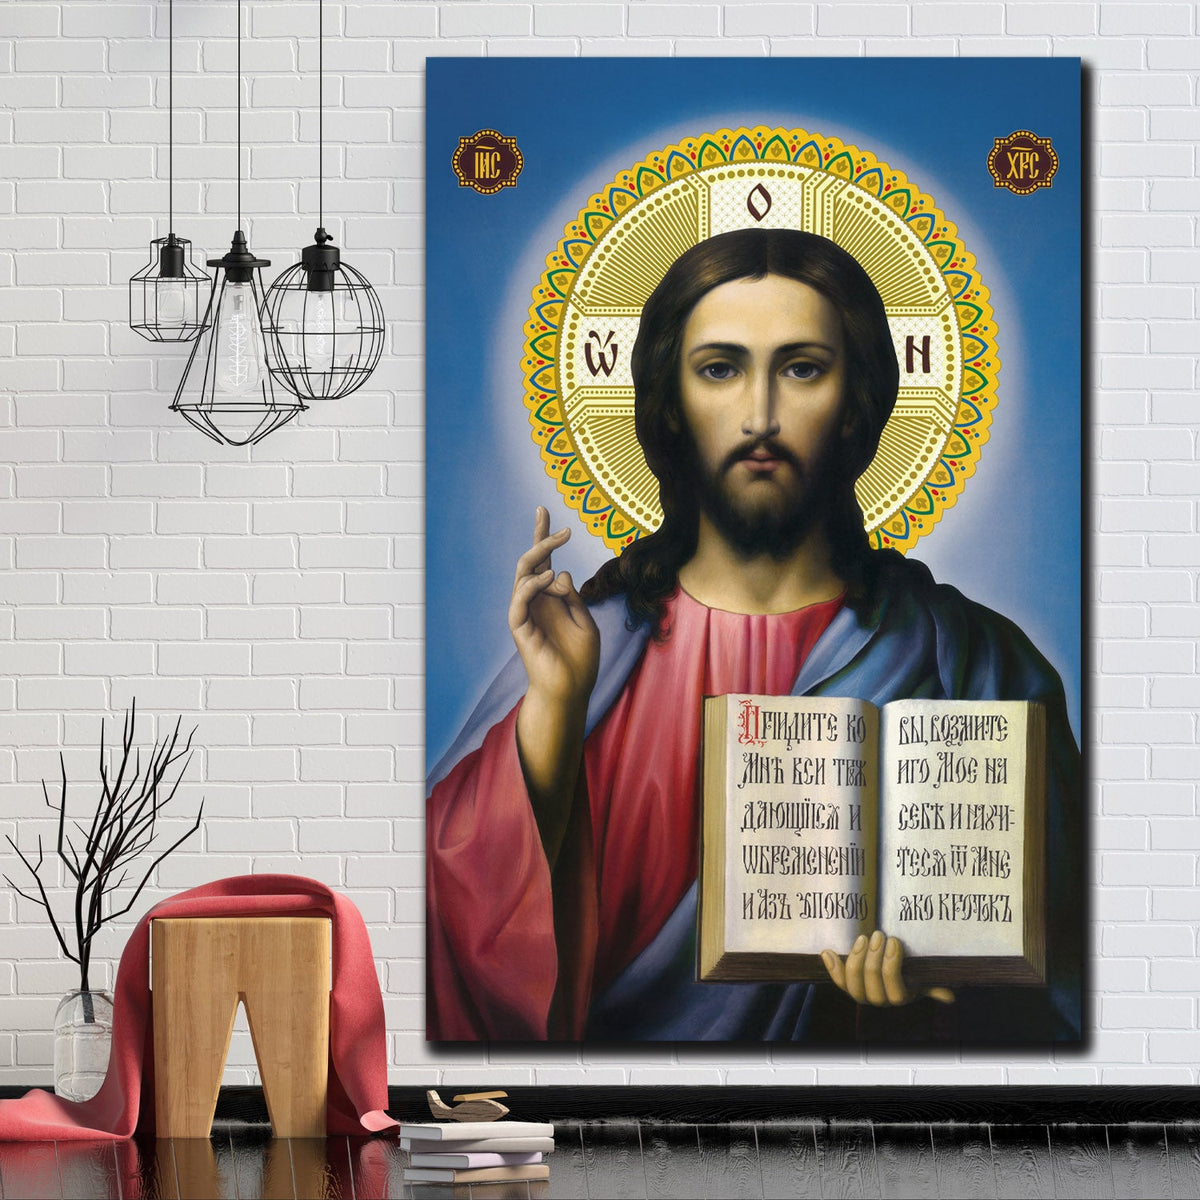 https://cdn.shopify.com/s/files/1/0387/9986/8044/products/JesusTheTruthCanvasArtprintStretched-2.jpg